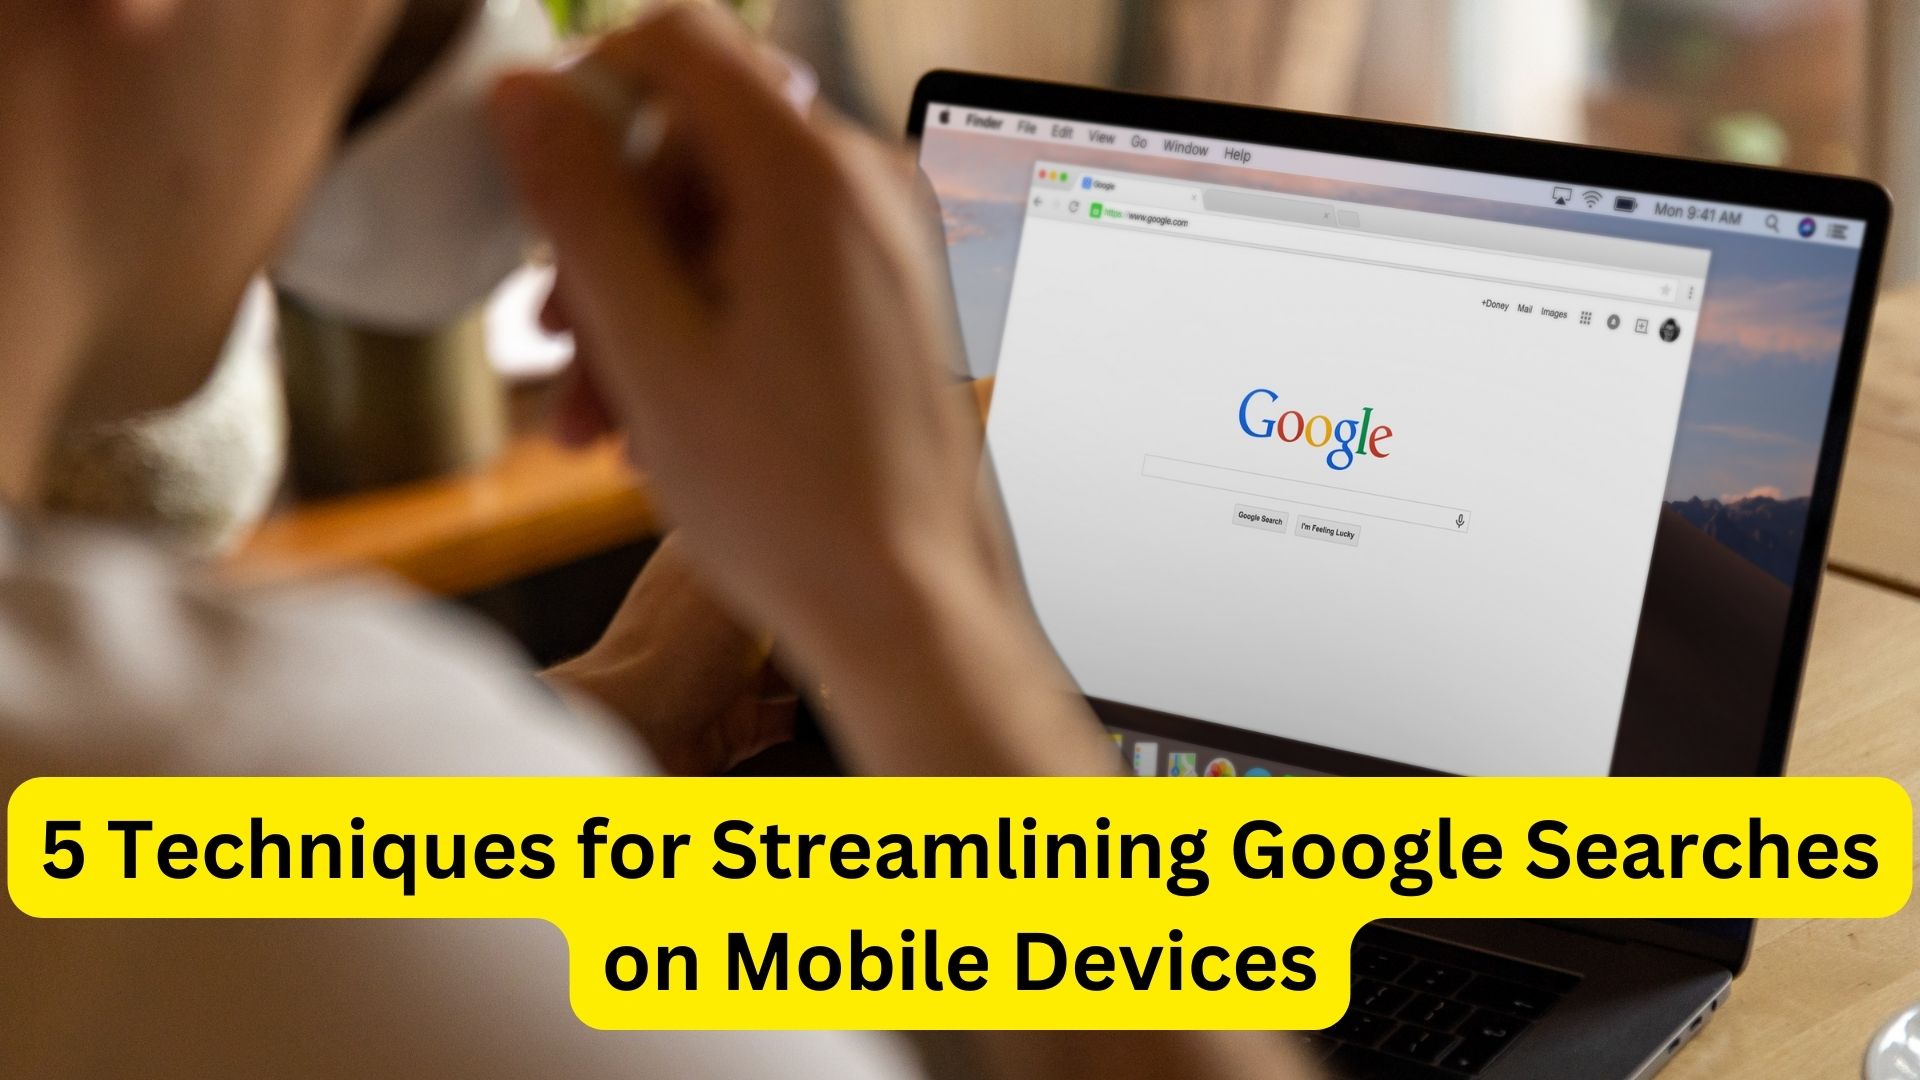 5 Techniques for Streamlining Google Searches on Mobile Devices